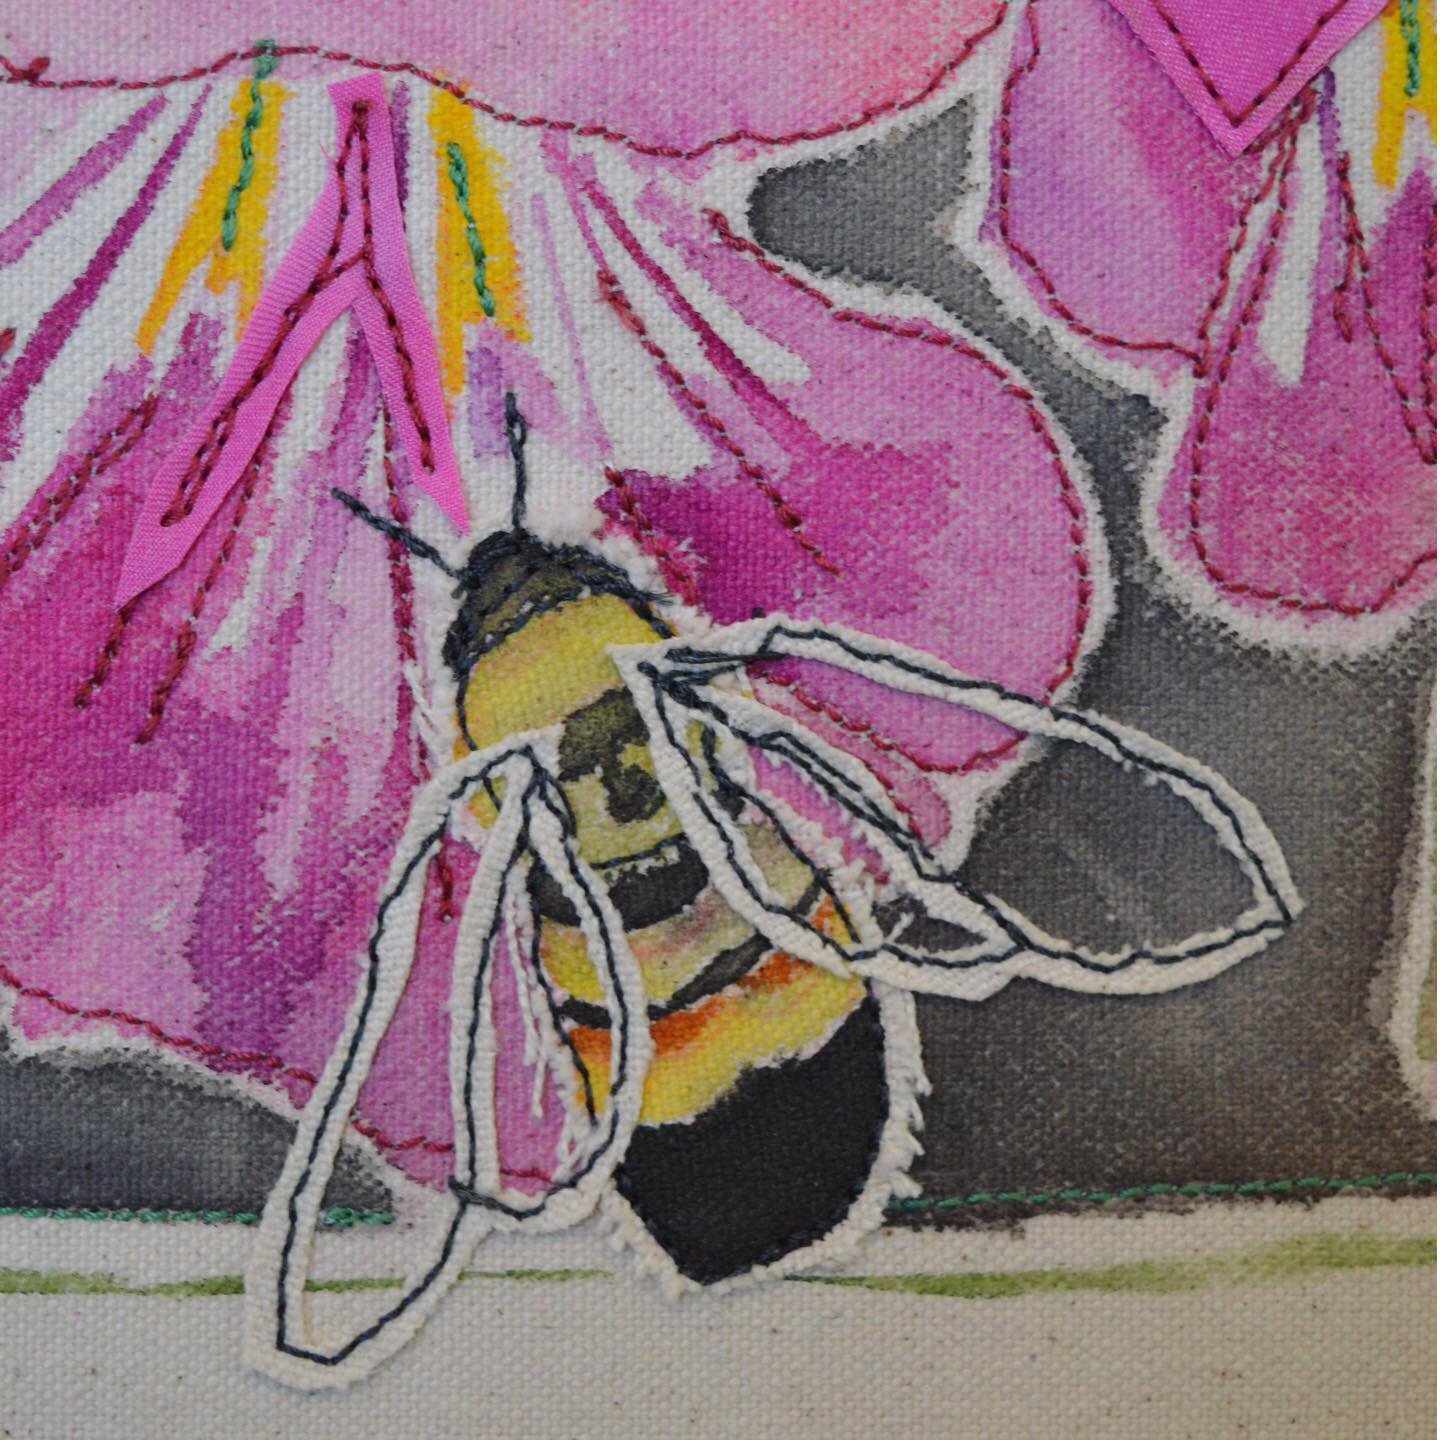 Hand painted bumblebee perching on a desert willow flower, machine stitch embellishment. 

I want to invite you to join me for the opening of my art exhibition&nbsp;in Santa Fe on Friday, May 19th, 4pm-7pm at @howyoureside .&nbsp;

Please&nbsp;bring 